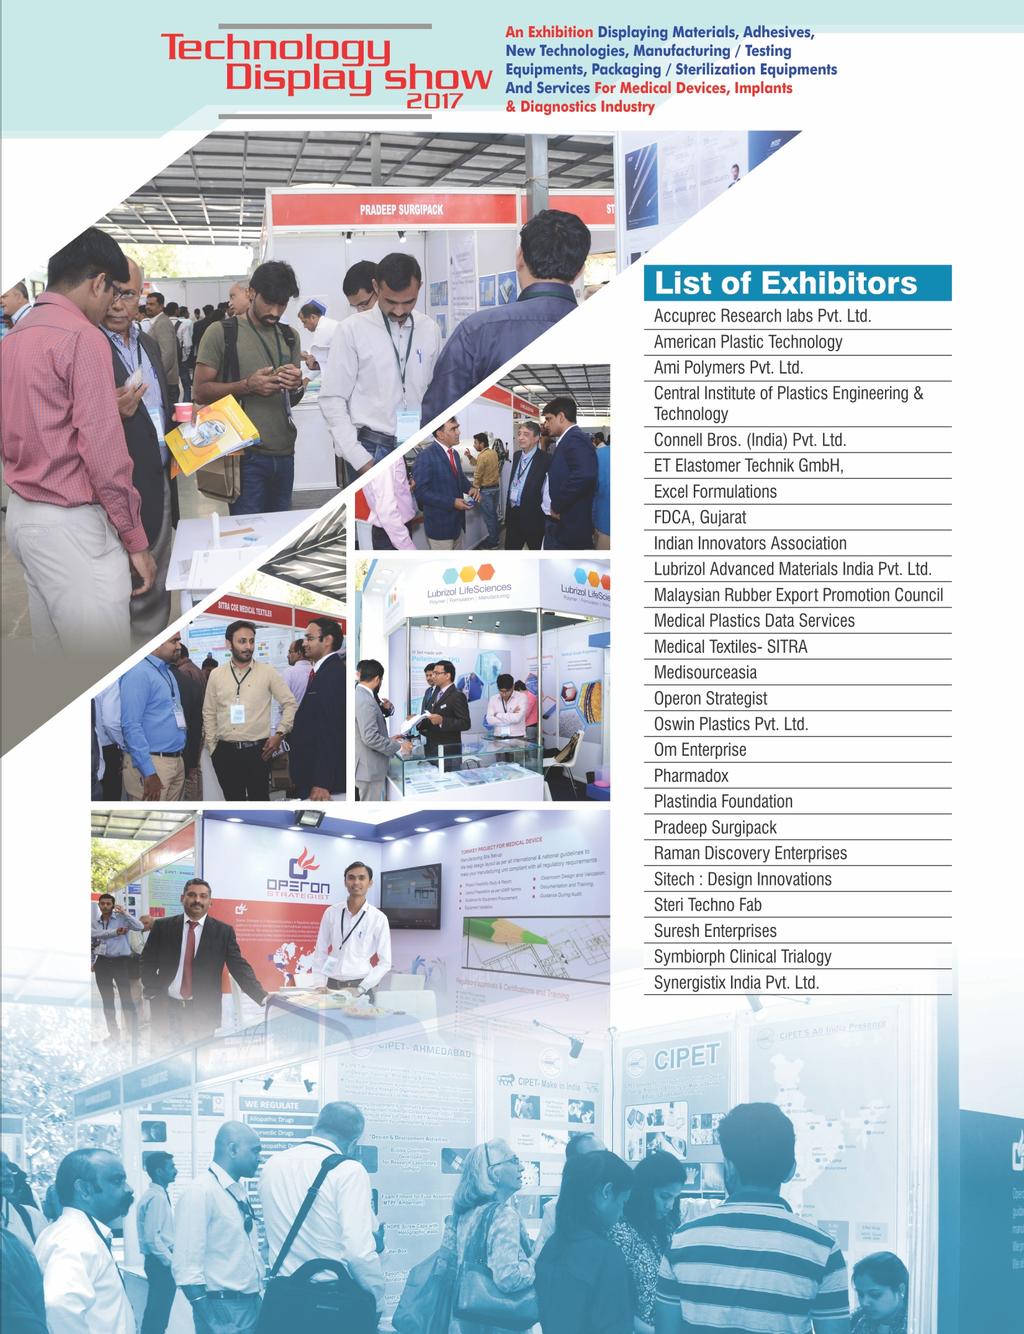 Technology Display show 2017 An Exhibition Displaying Materials, Adhesives, New Technologies, Manufacturing / Testing Equipments, Packaging / Sterilization Equipments And Services For Medical